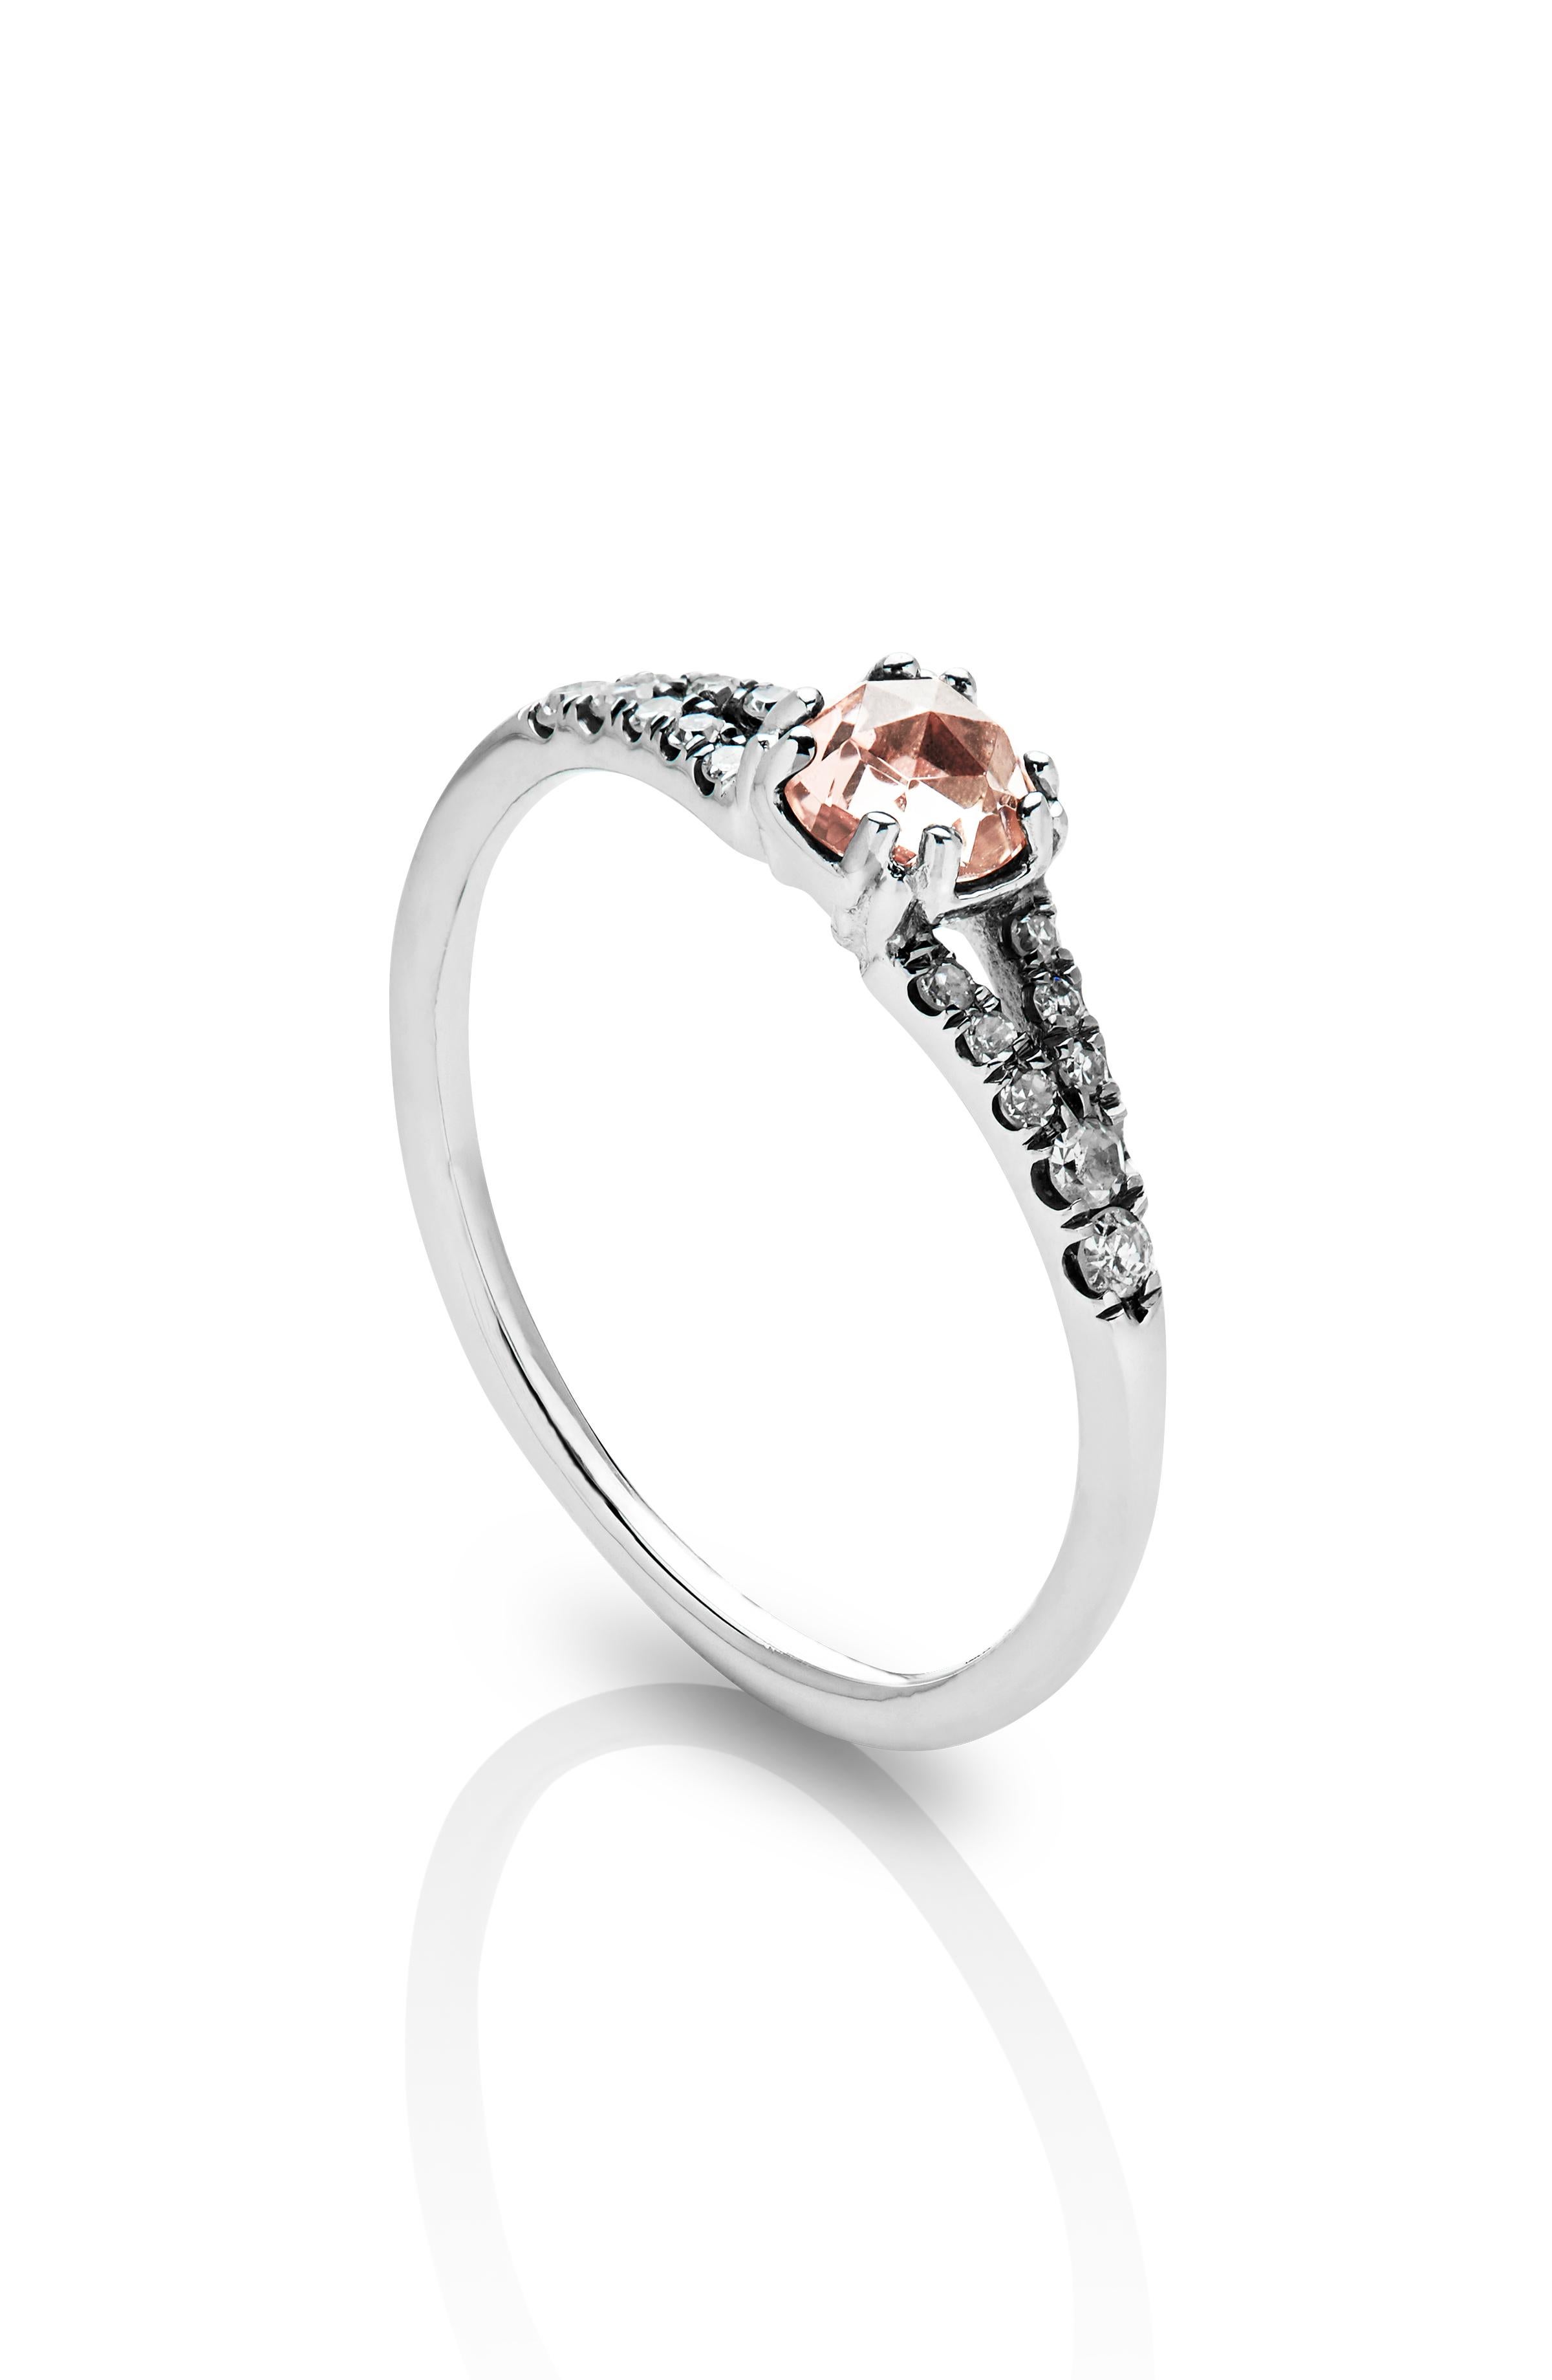 MANIAMANIA Devotion Engagement ring 14k White Gold with a 4.8mm round rose cut Peachy Pink Tourmaline center stone, with pavé of white diamonds (0.15-0.18 ctw). Size 5.5.

Hand made in New York, this Devotion ring is antique inspired in its design